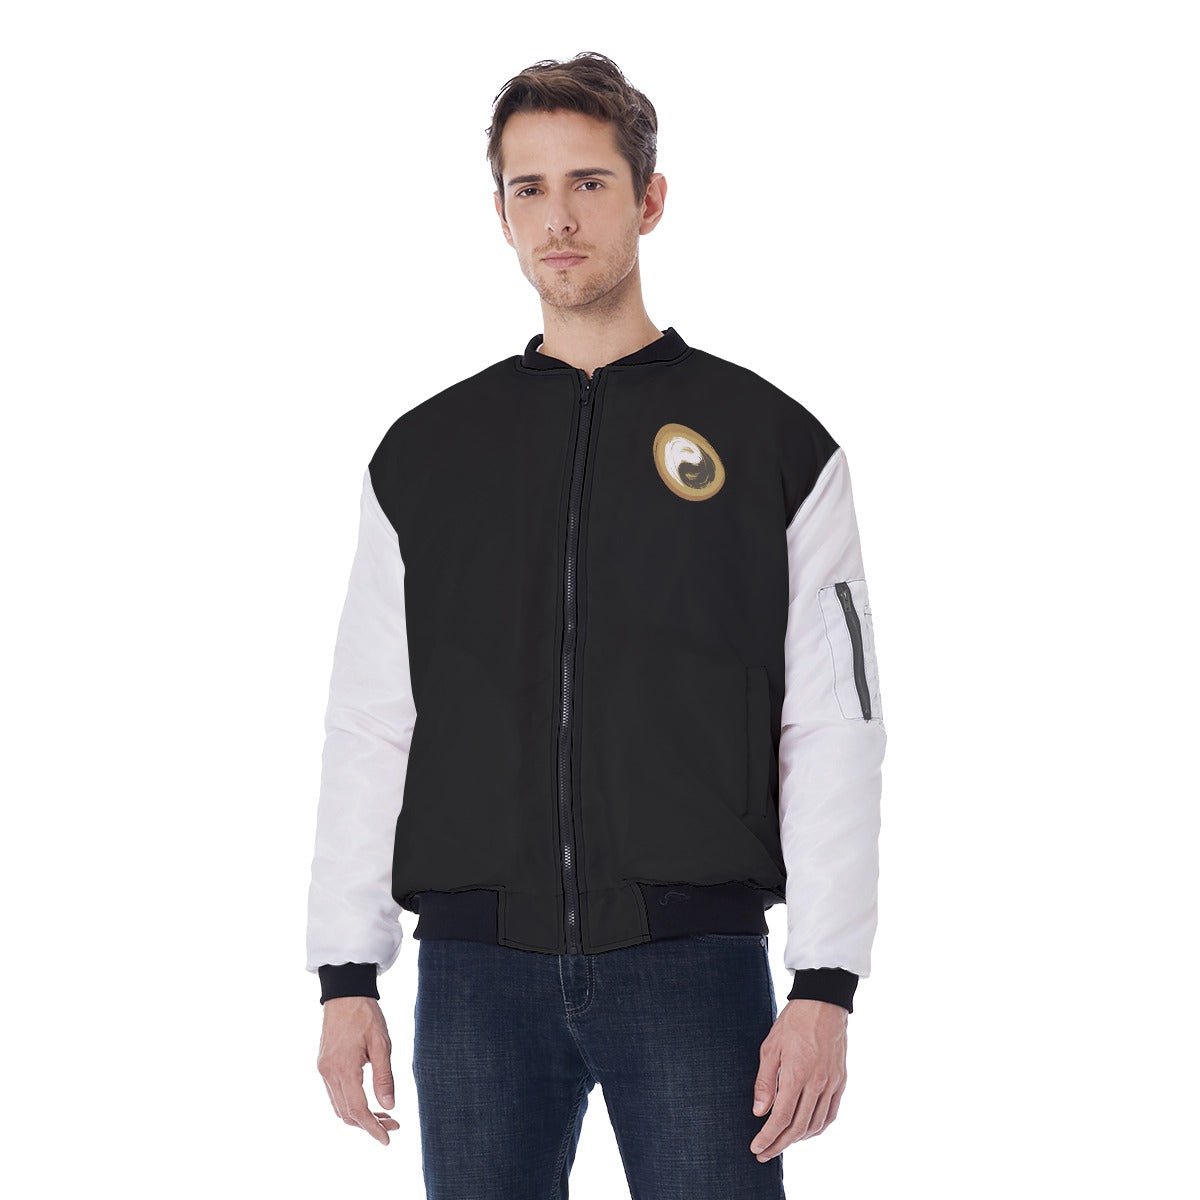 Men's Bomber Jacket for Yoga Lovers - Personal Hour for Yoga and Meditations 